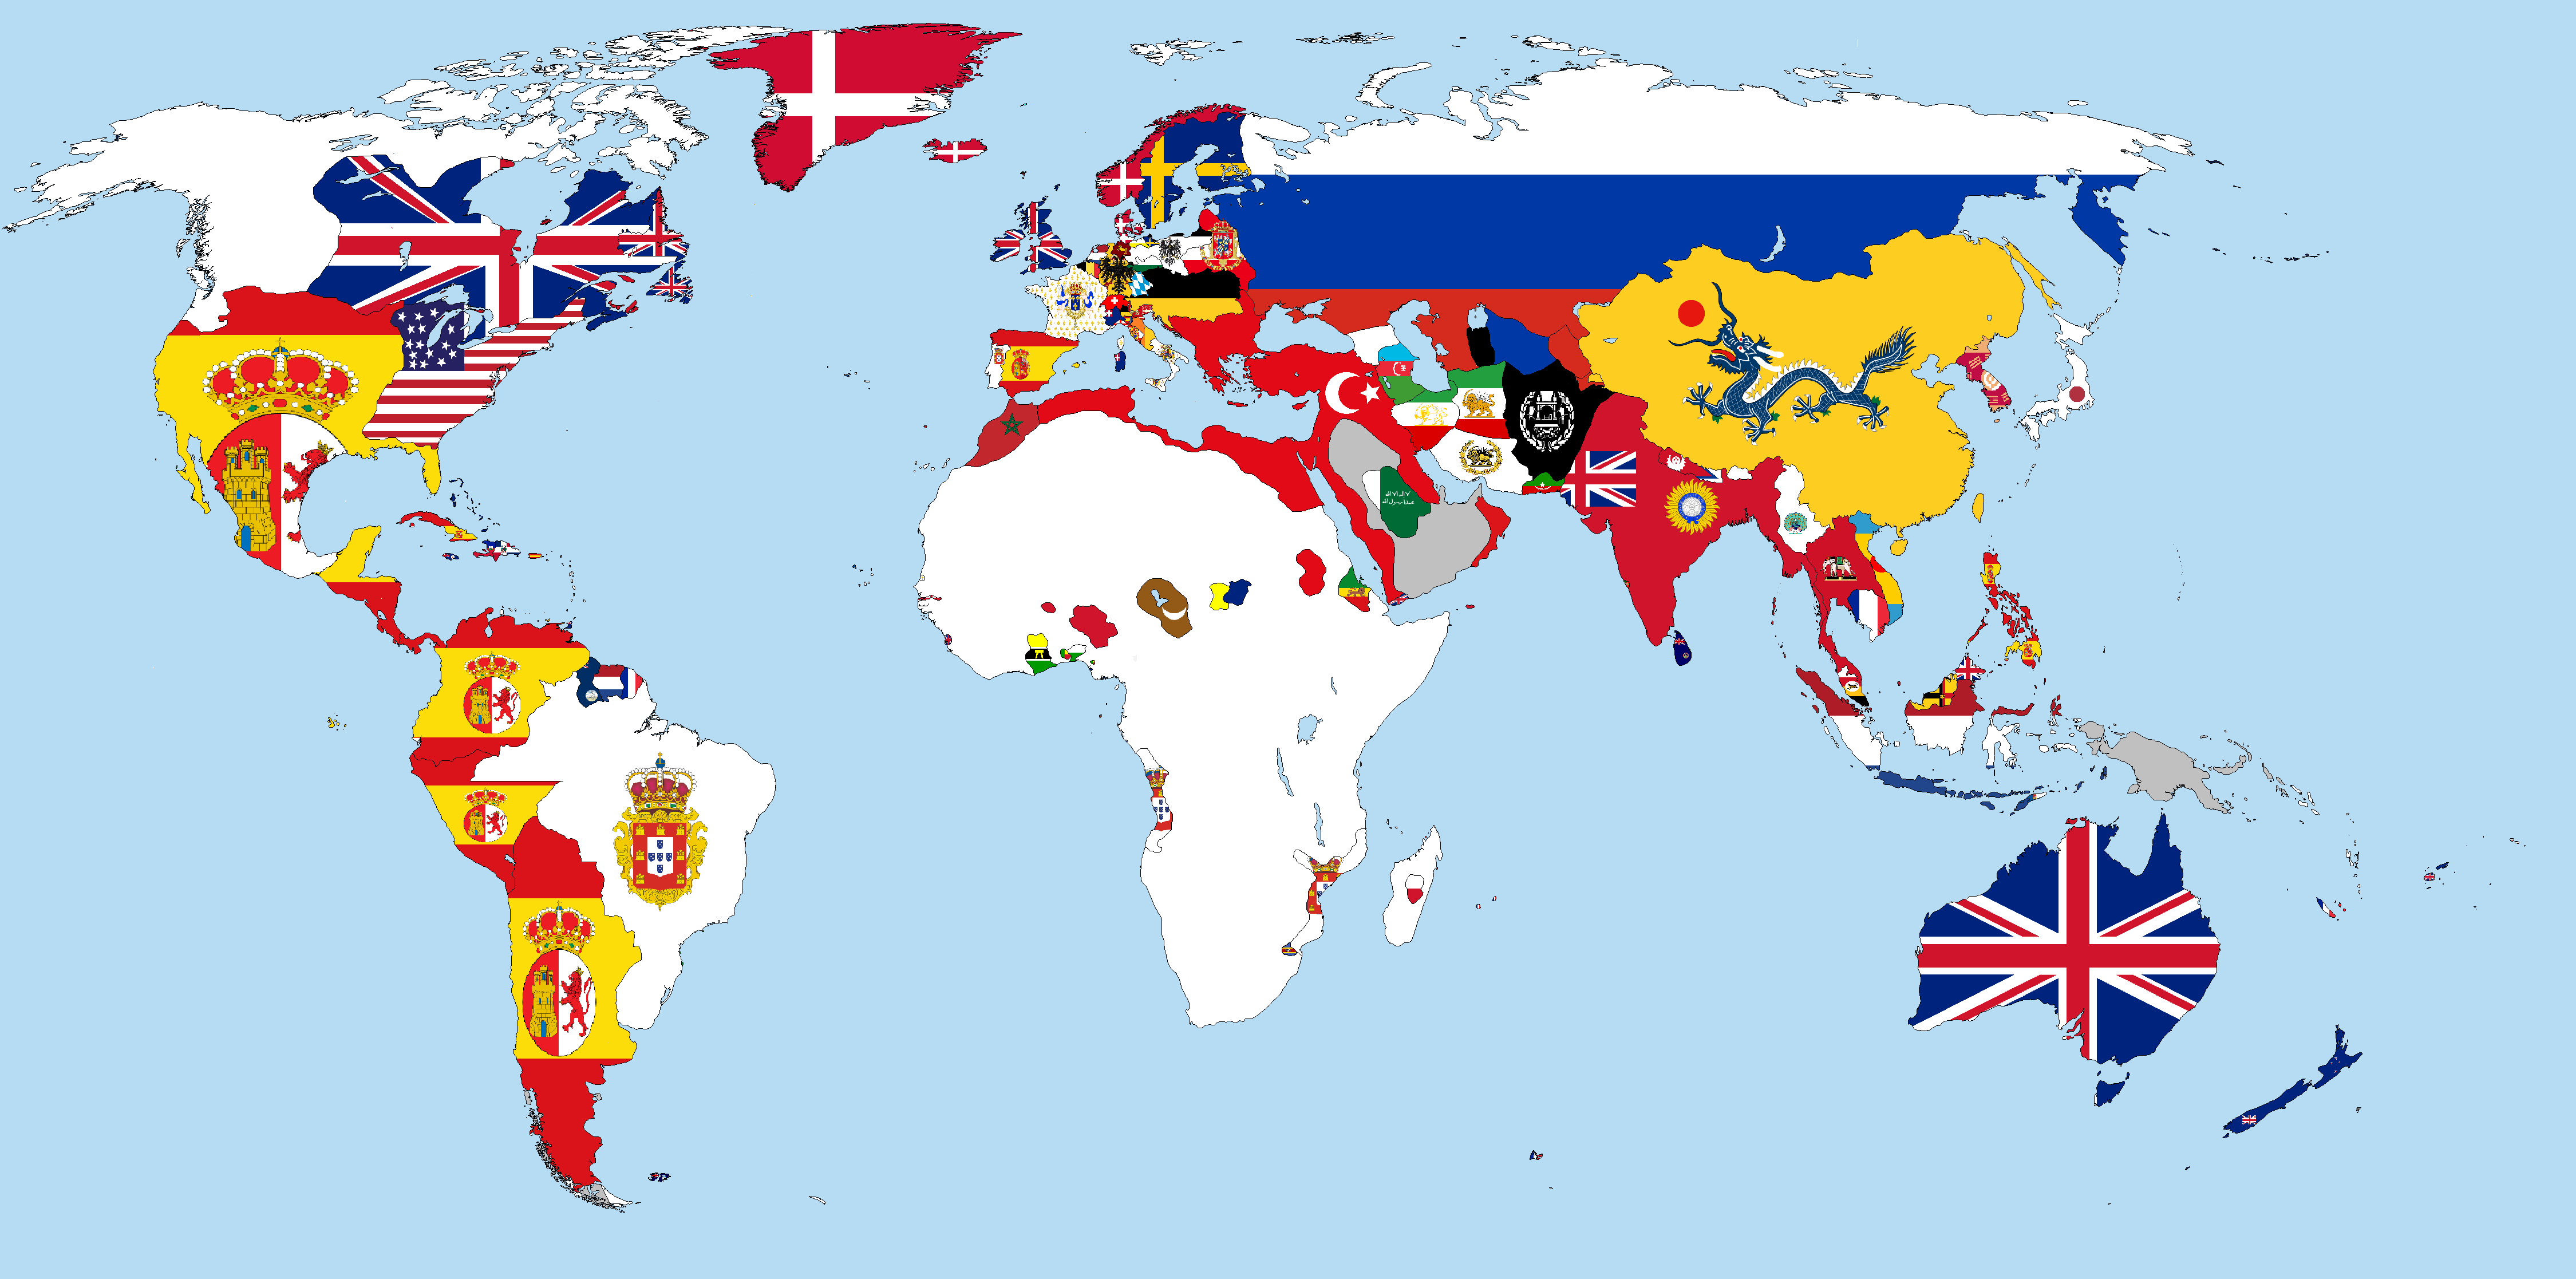 File:World Flag Map 1789.png - Wikimedia Commons